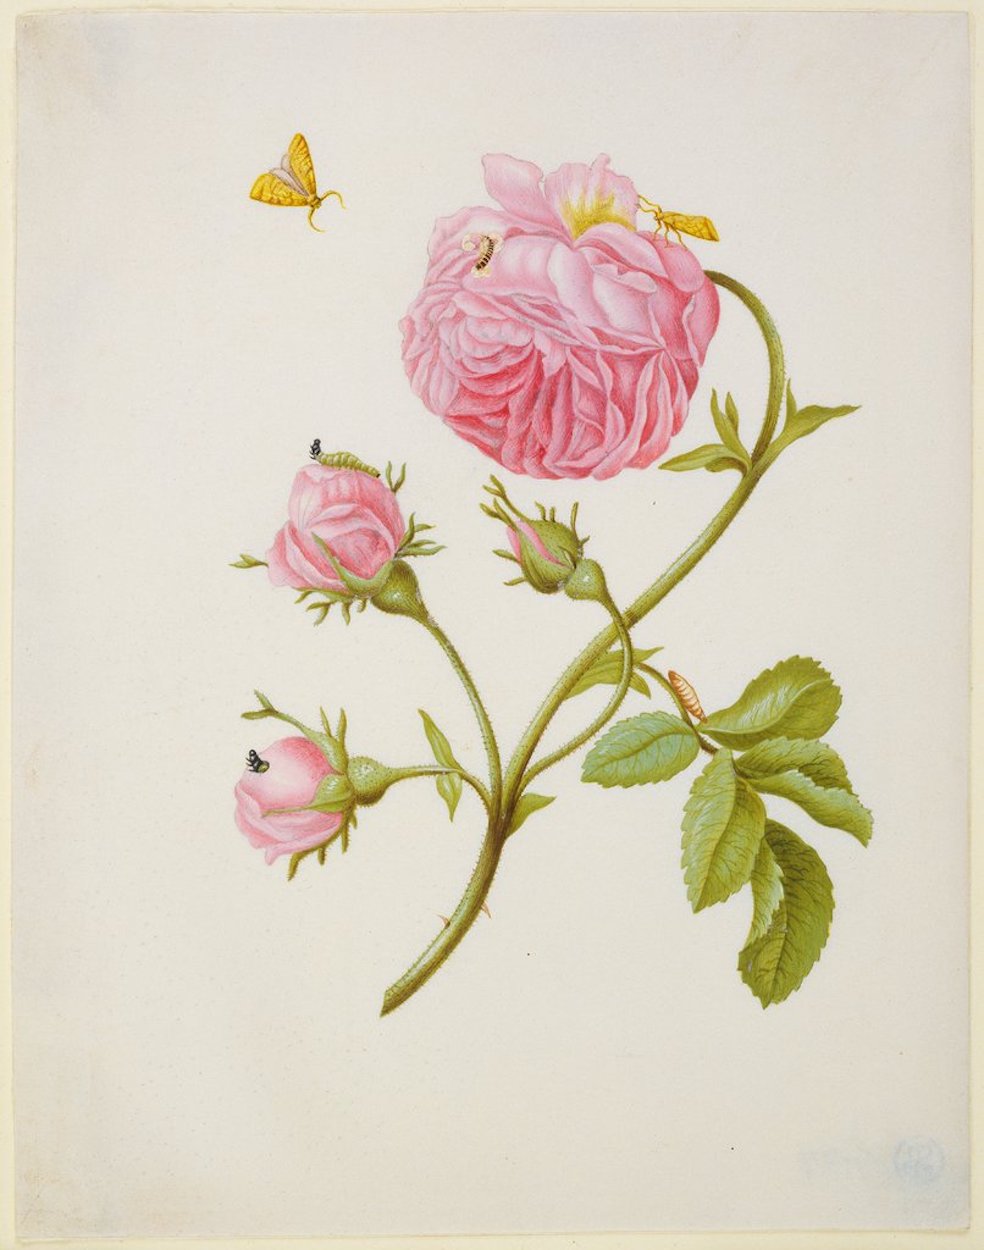 Rose with Metamorphosis of Leaf Roller and a Glued Beetle Larva by Maria Sibylla Merian - after 1679 - 18.8 x 14.6 cm Städel Museum